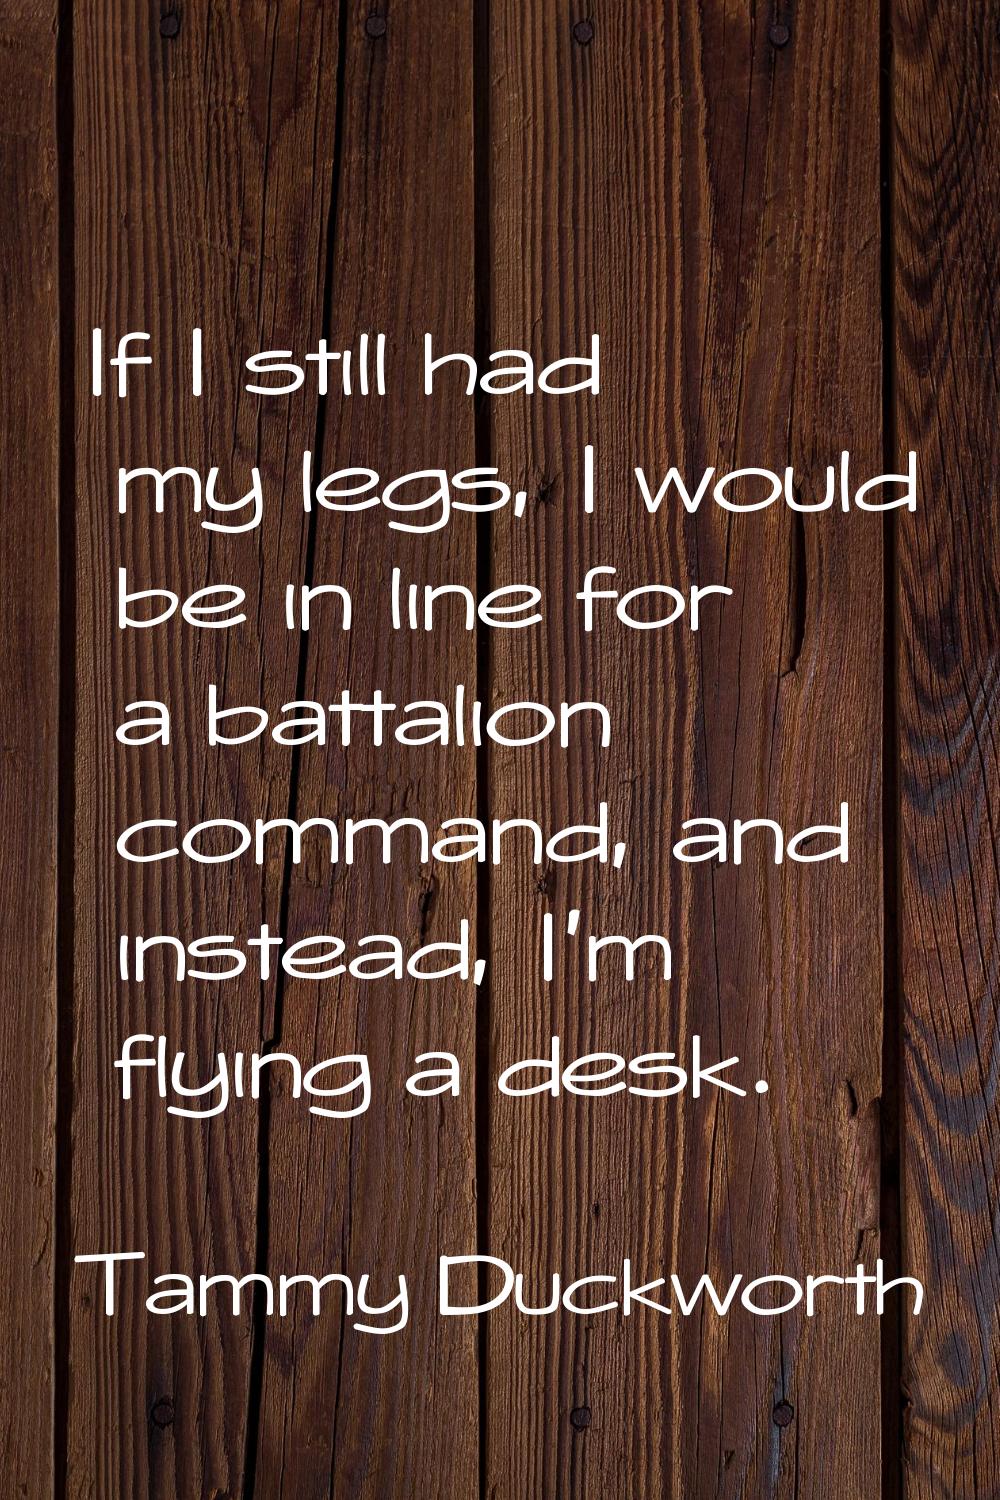 If I still had my legs, I would be in line for a battalion command, and instead, I'm flying a desk.